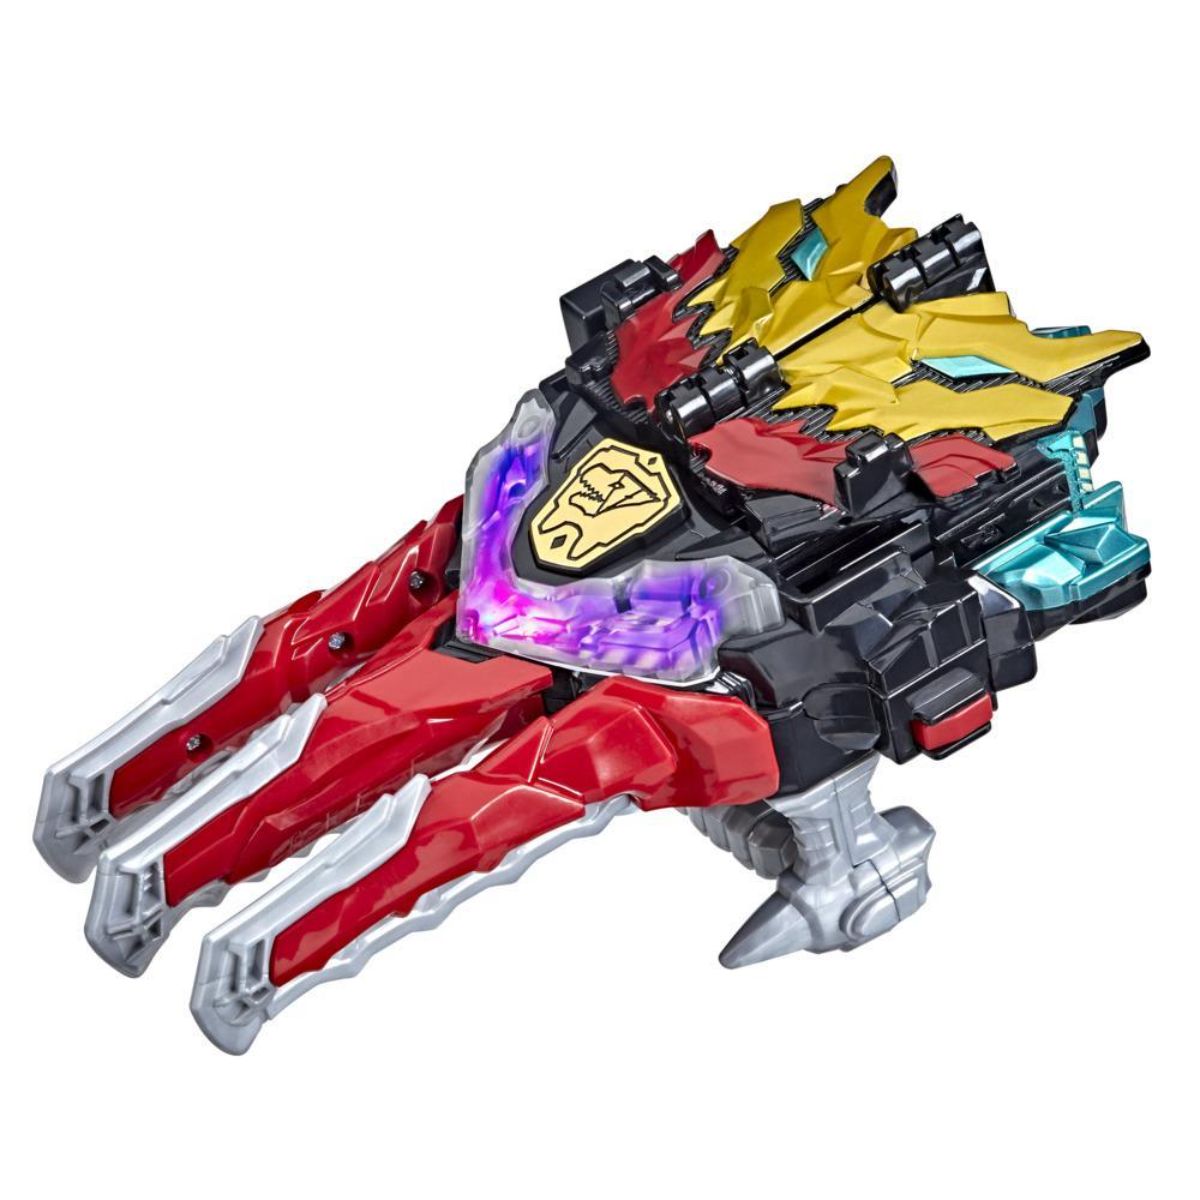 Prg Dnf Dino Knight Morpher